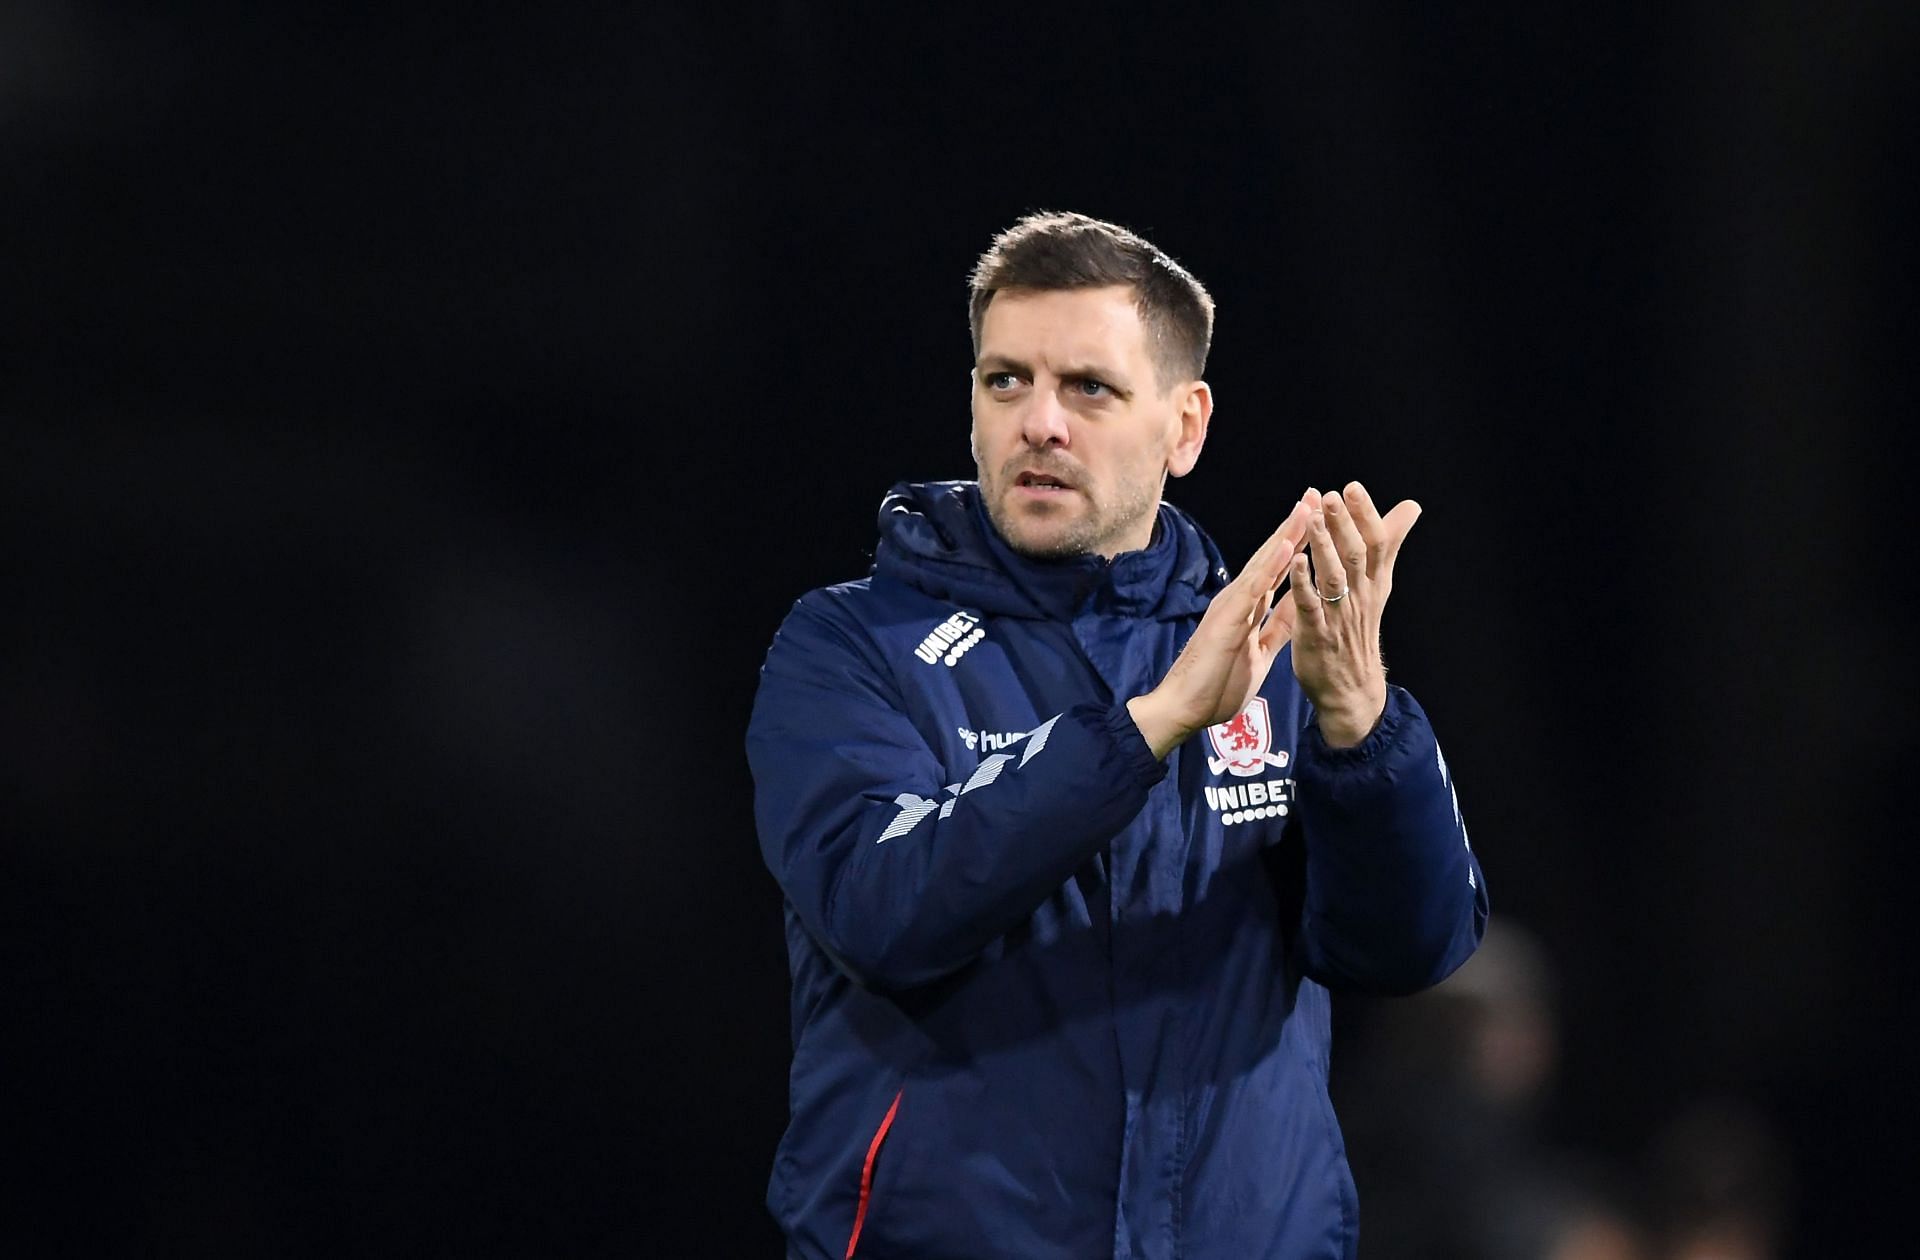 Woodgate has turned to management after retirement